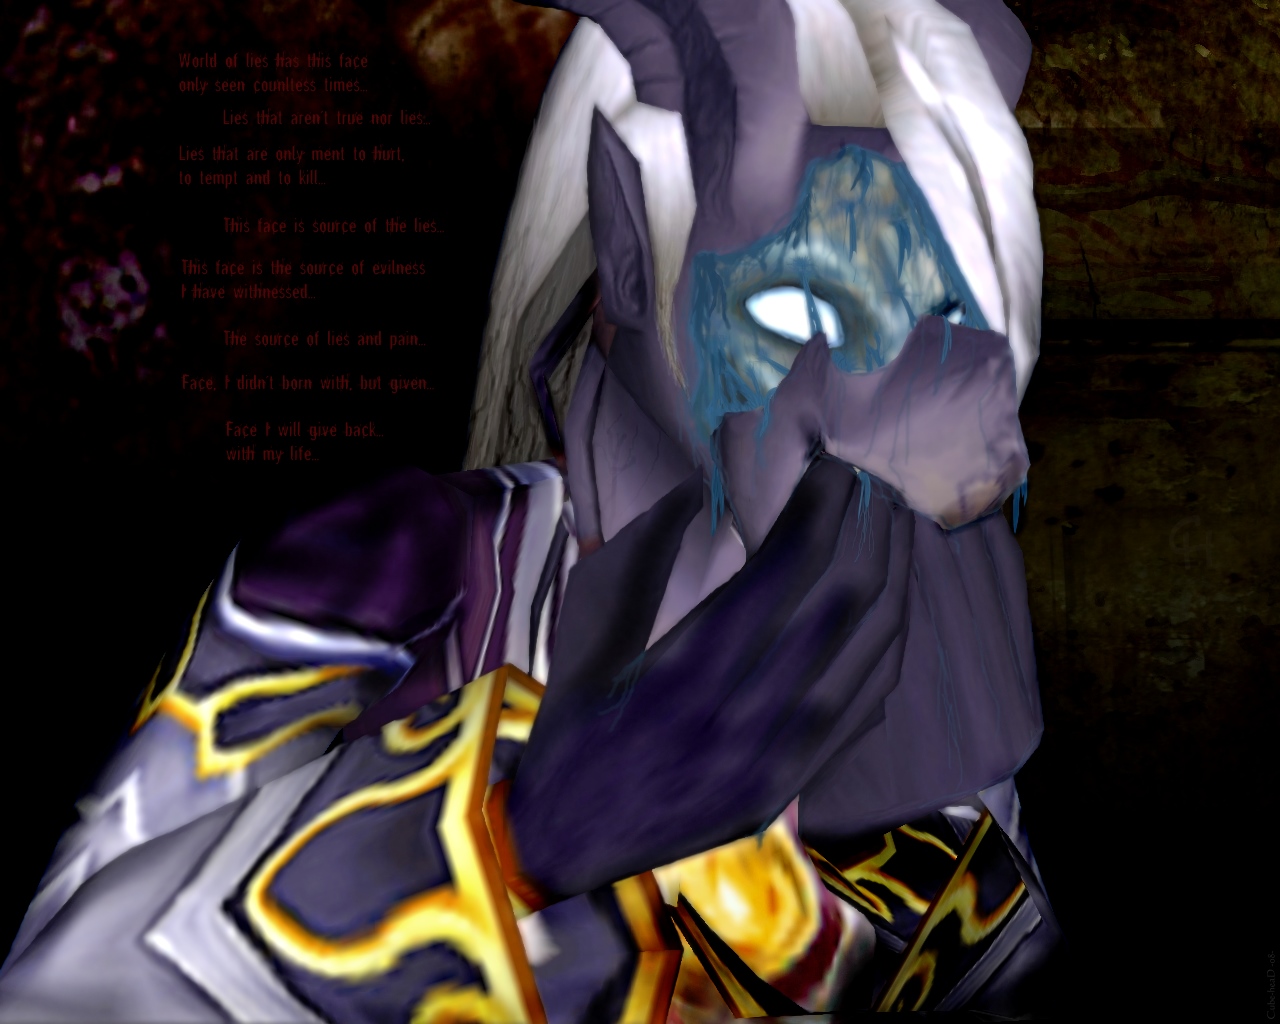 Dark-Selanaar's Diary of Madness 8/8 [Darkside/Draenei/Gore/Horro]
< Flavour text lost in time >
Picture 8/8
Keywords: Darkside;OC;Draenei;Gore;Horror